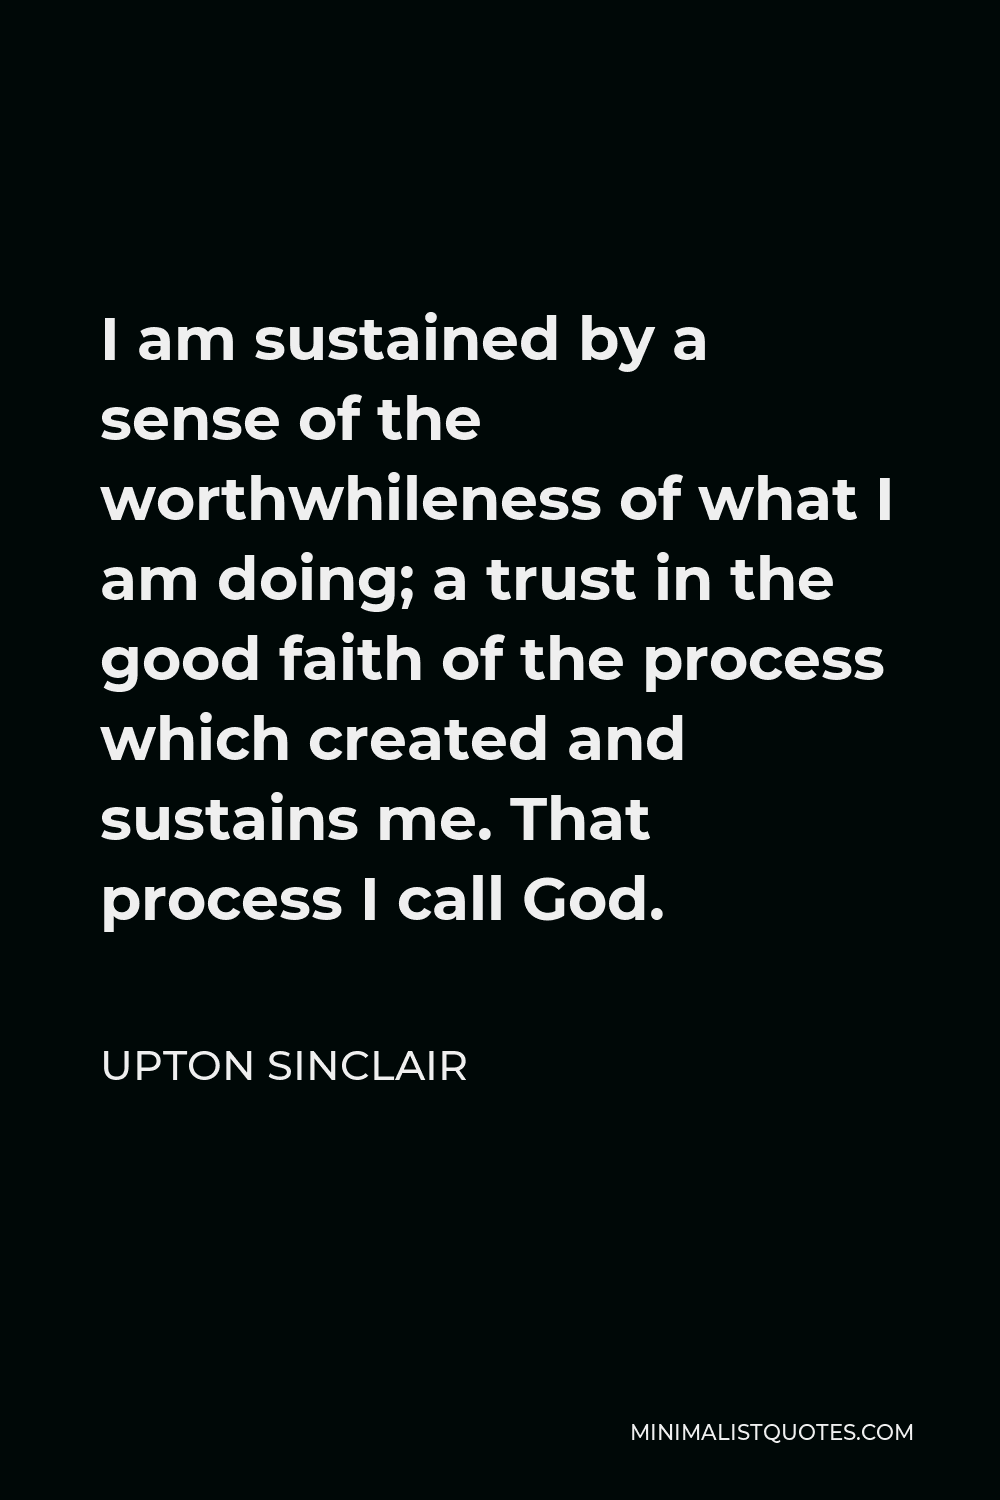 Upton Sinclair Quote - I am sustained by a sense of the worthwhileness of what I am doing; a trust in the good faith of the process which created and sustains me. That process I call God.